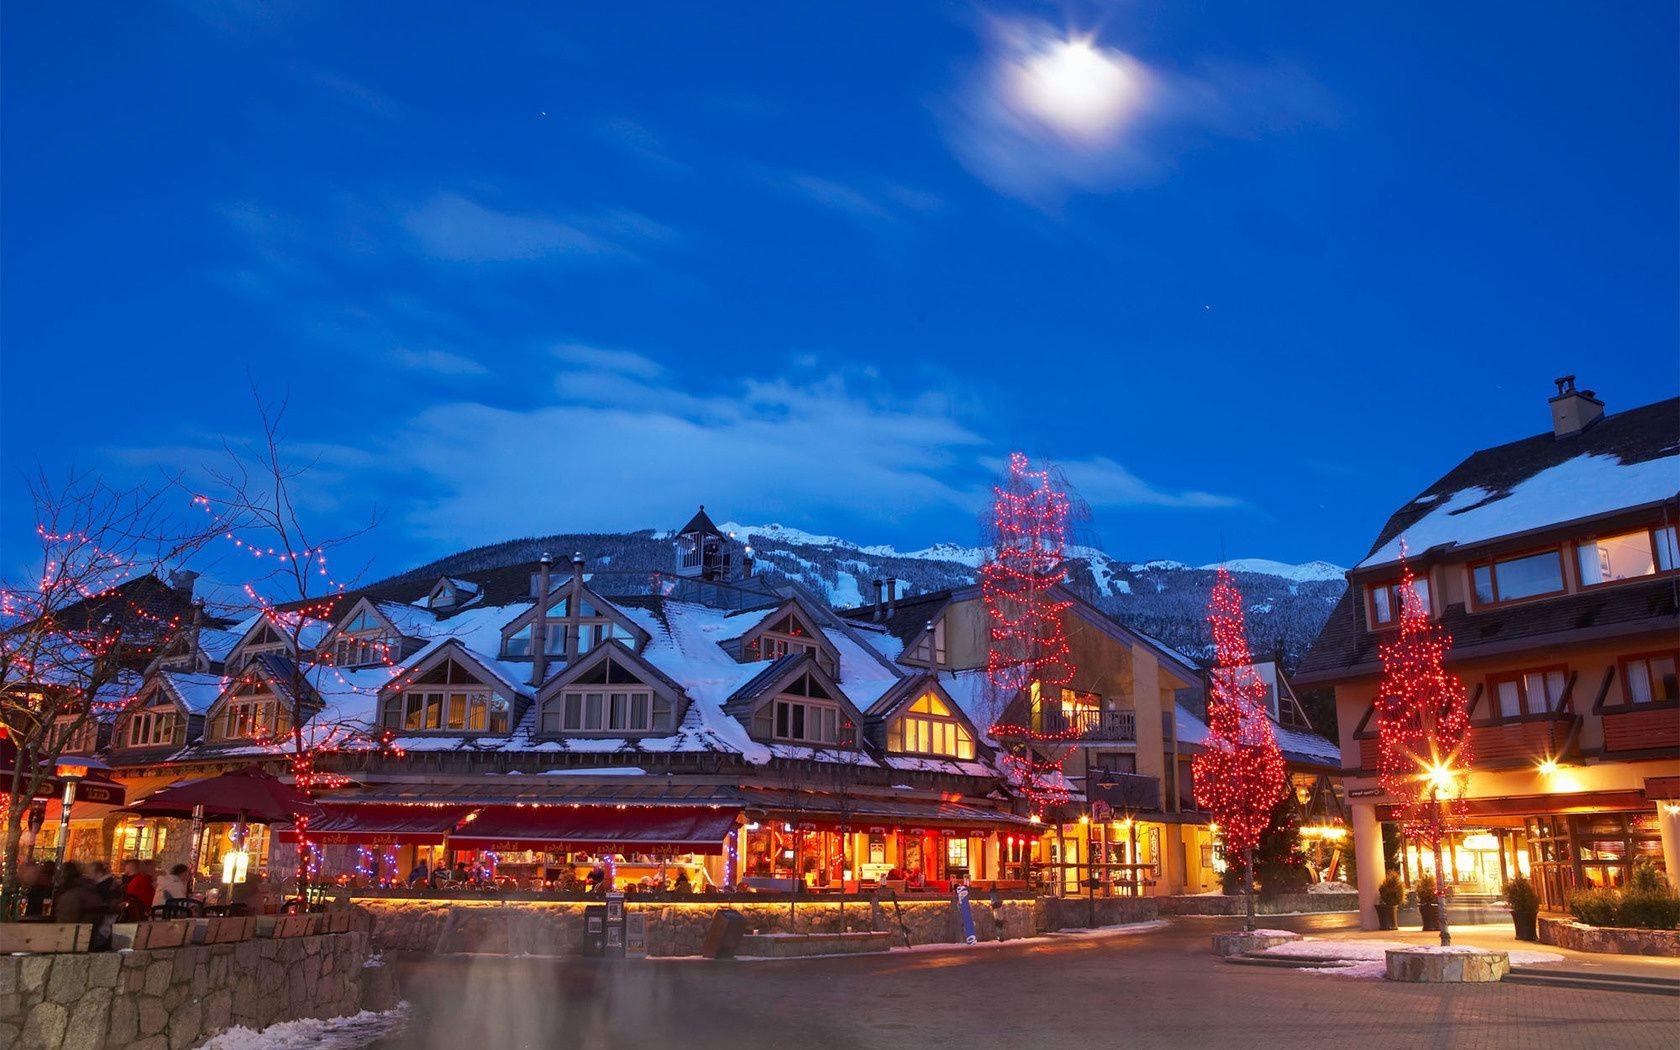 City city whistler canada Android wallpapers for free